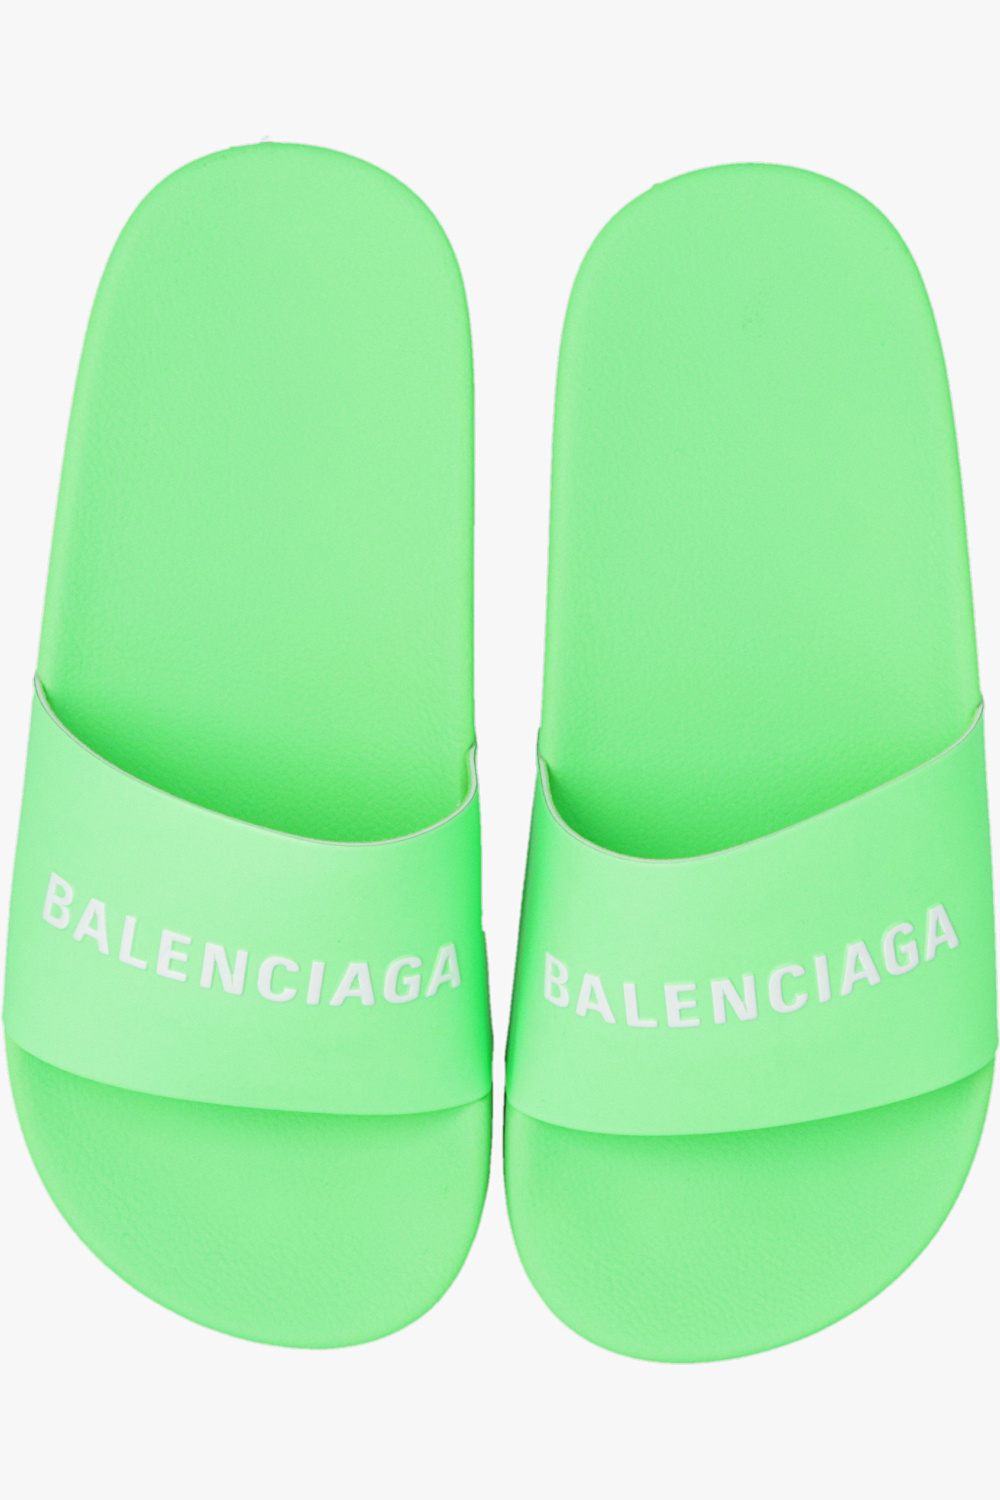 Balenciaga Kids the upcoming sneakers indulge in a 1990s